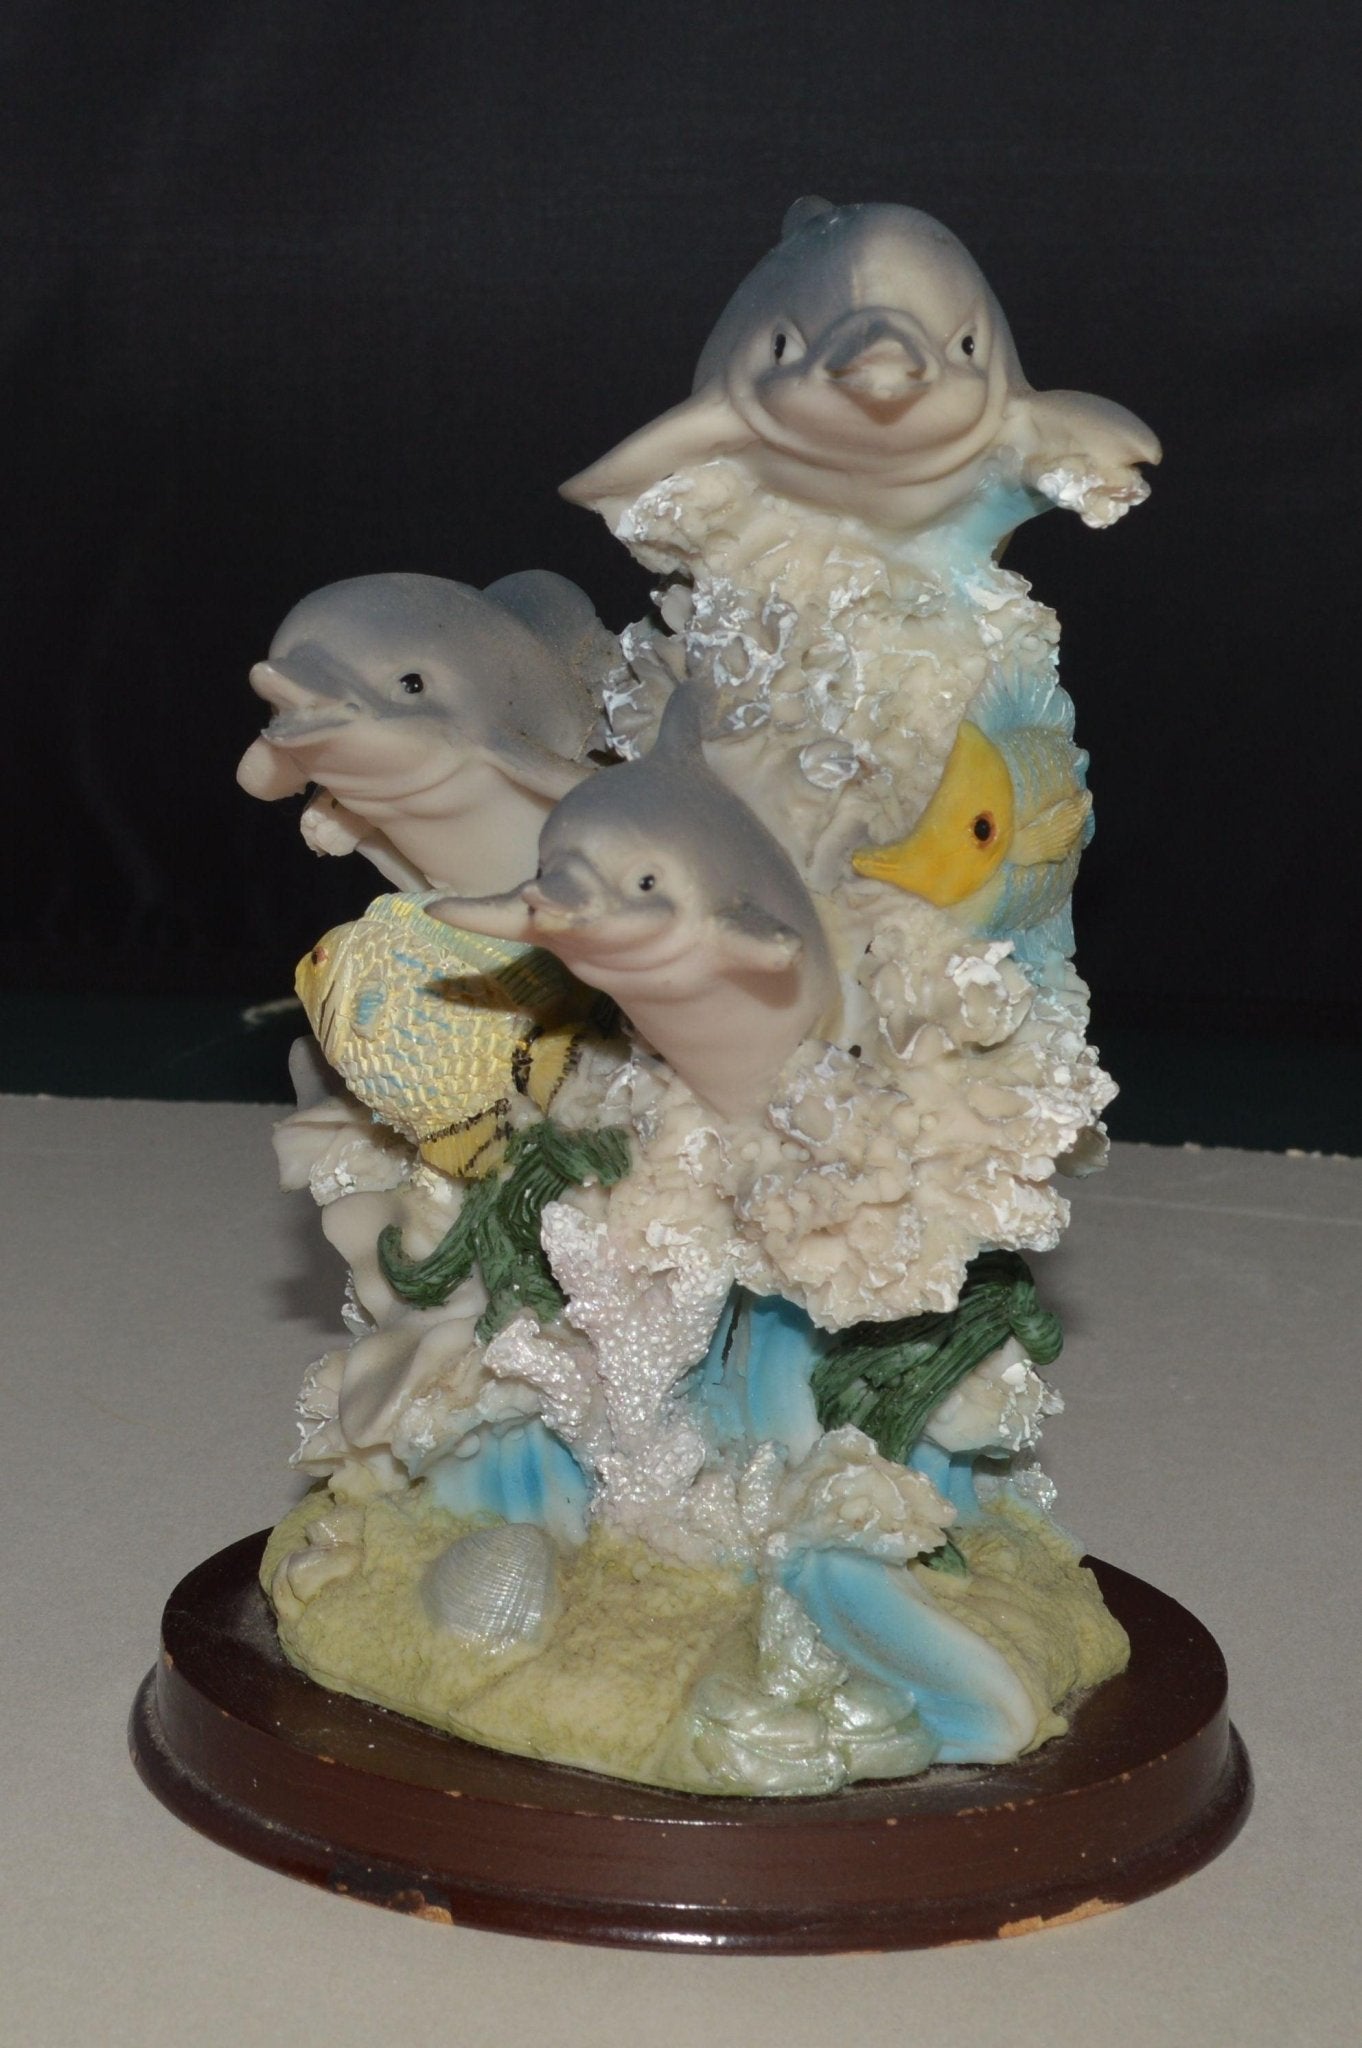 DECORATIVE ORNAMENT DOLPHINS ON A WOODEN BASE(PREVIOUSLY OWNED) GOOD CONDITION - TMD167207